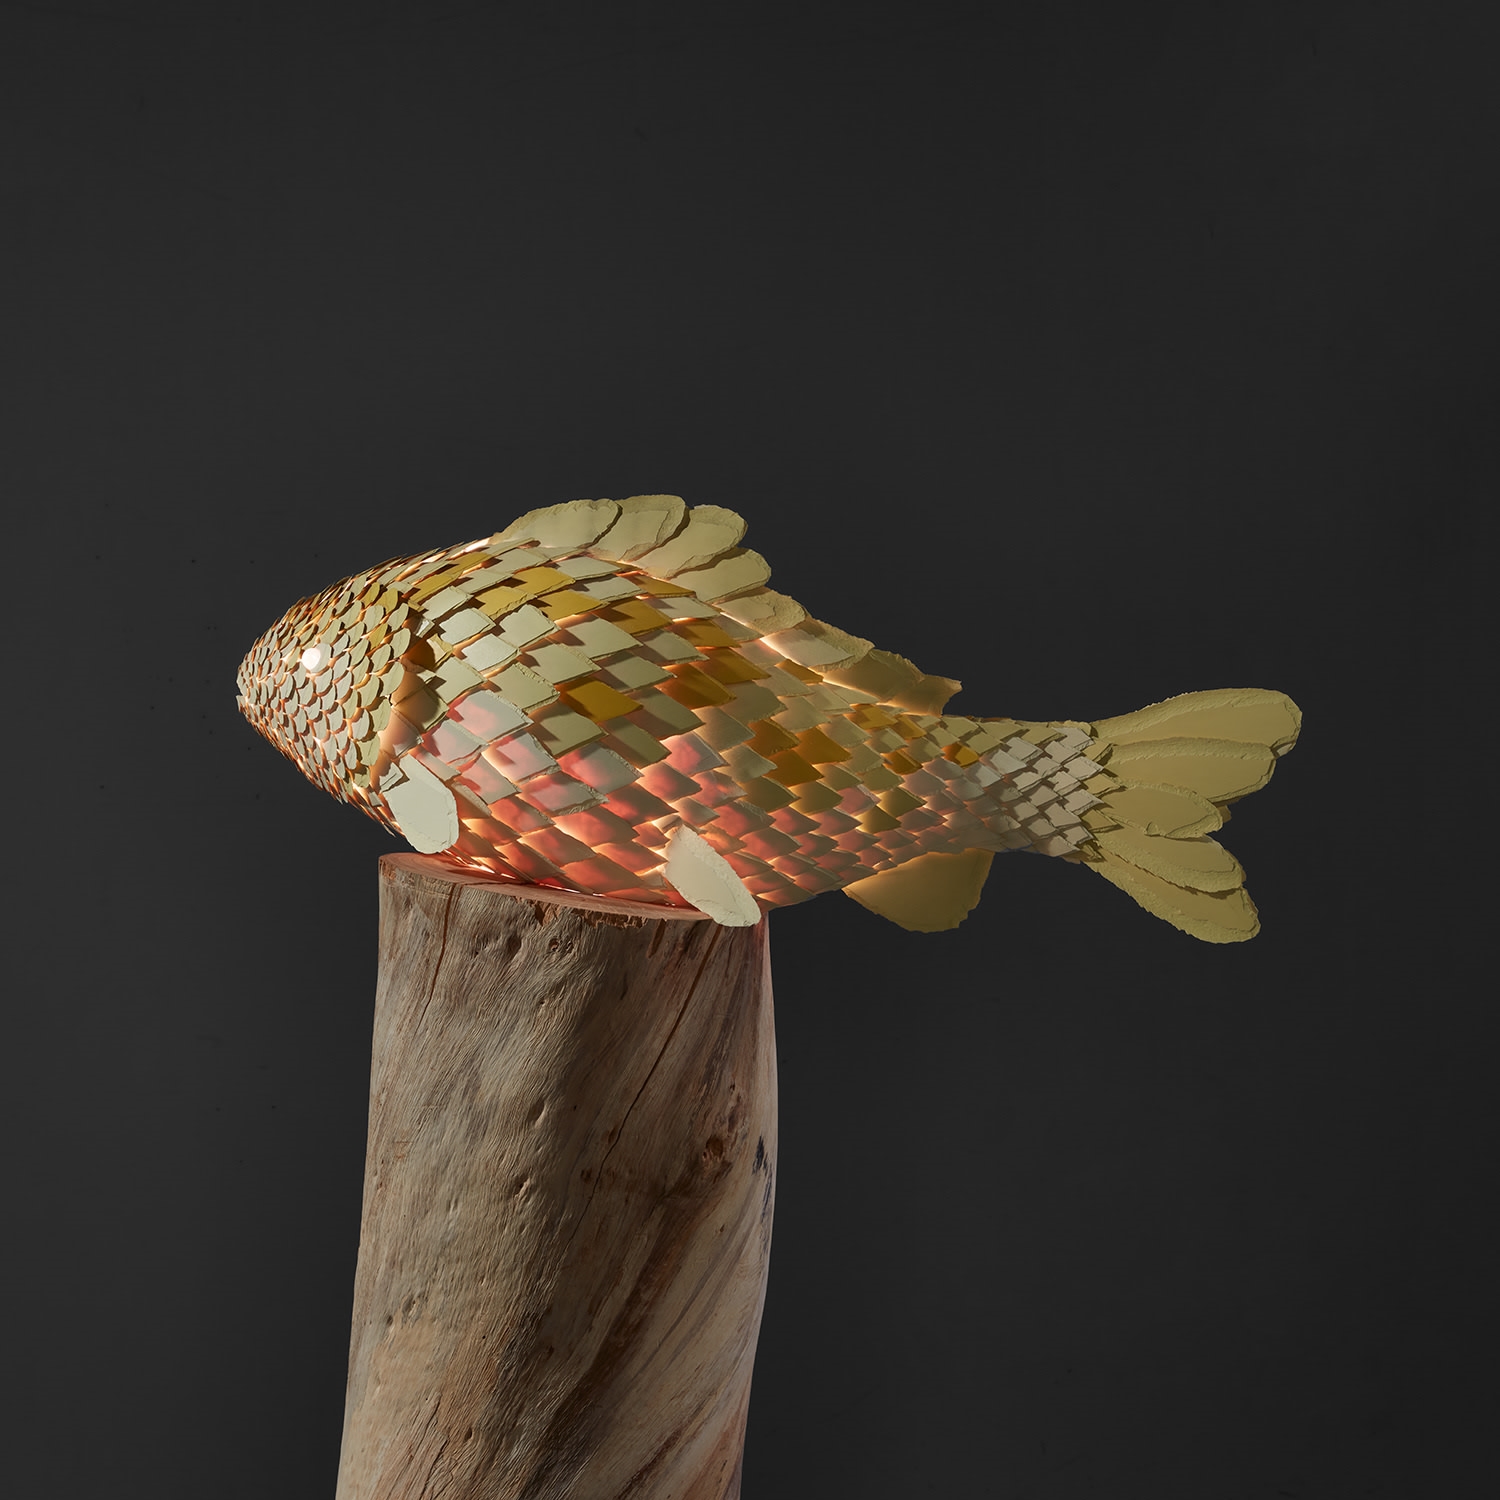 265: FRANK GEHRY, Fish Lamp < Important Design, 13 December 2012 < Auctions